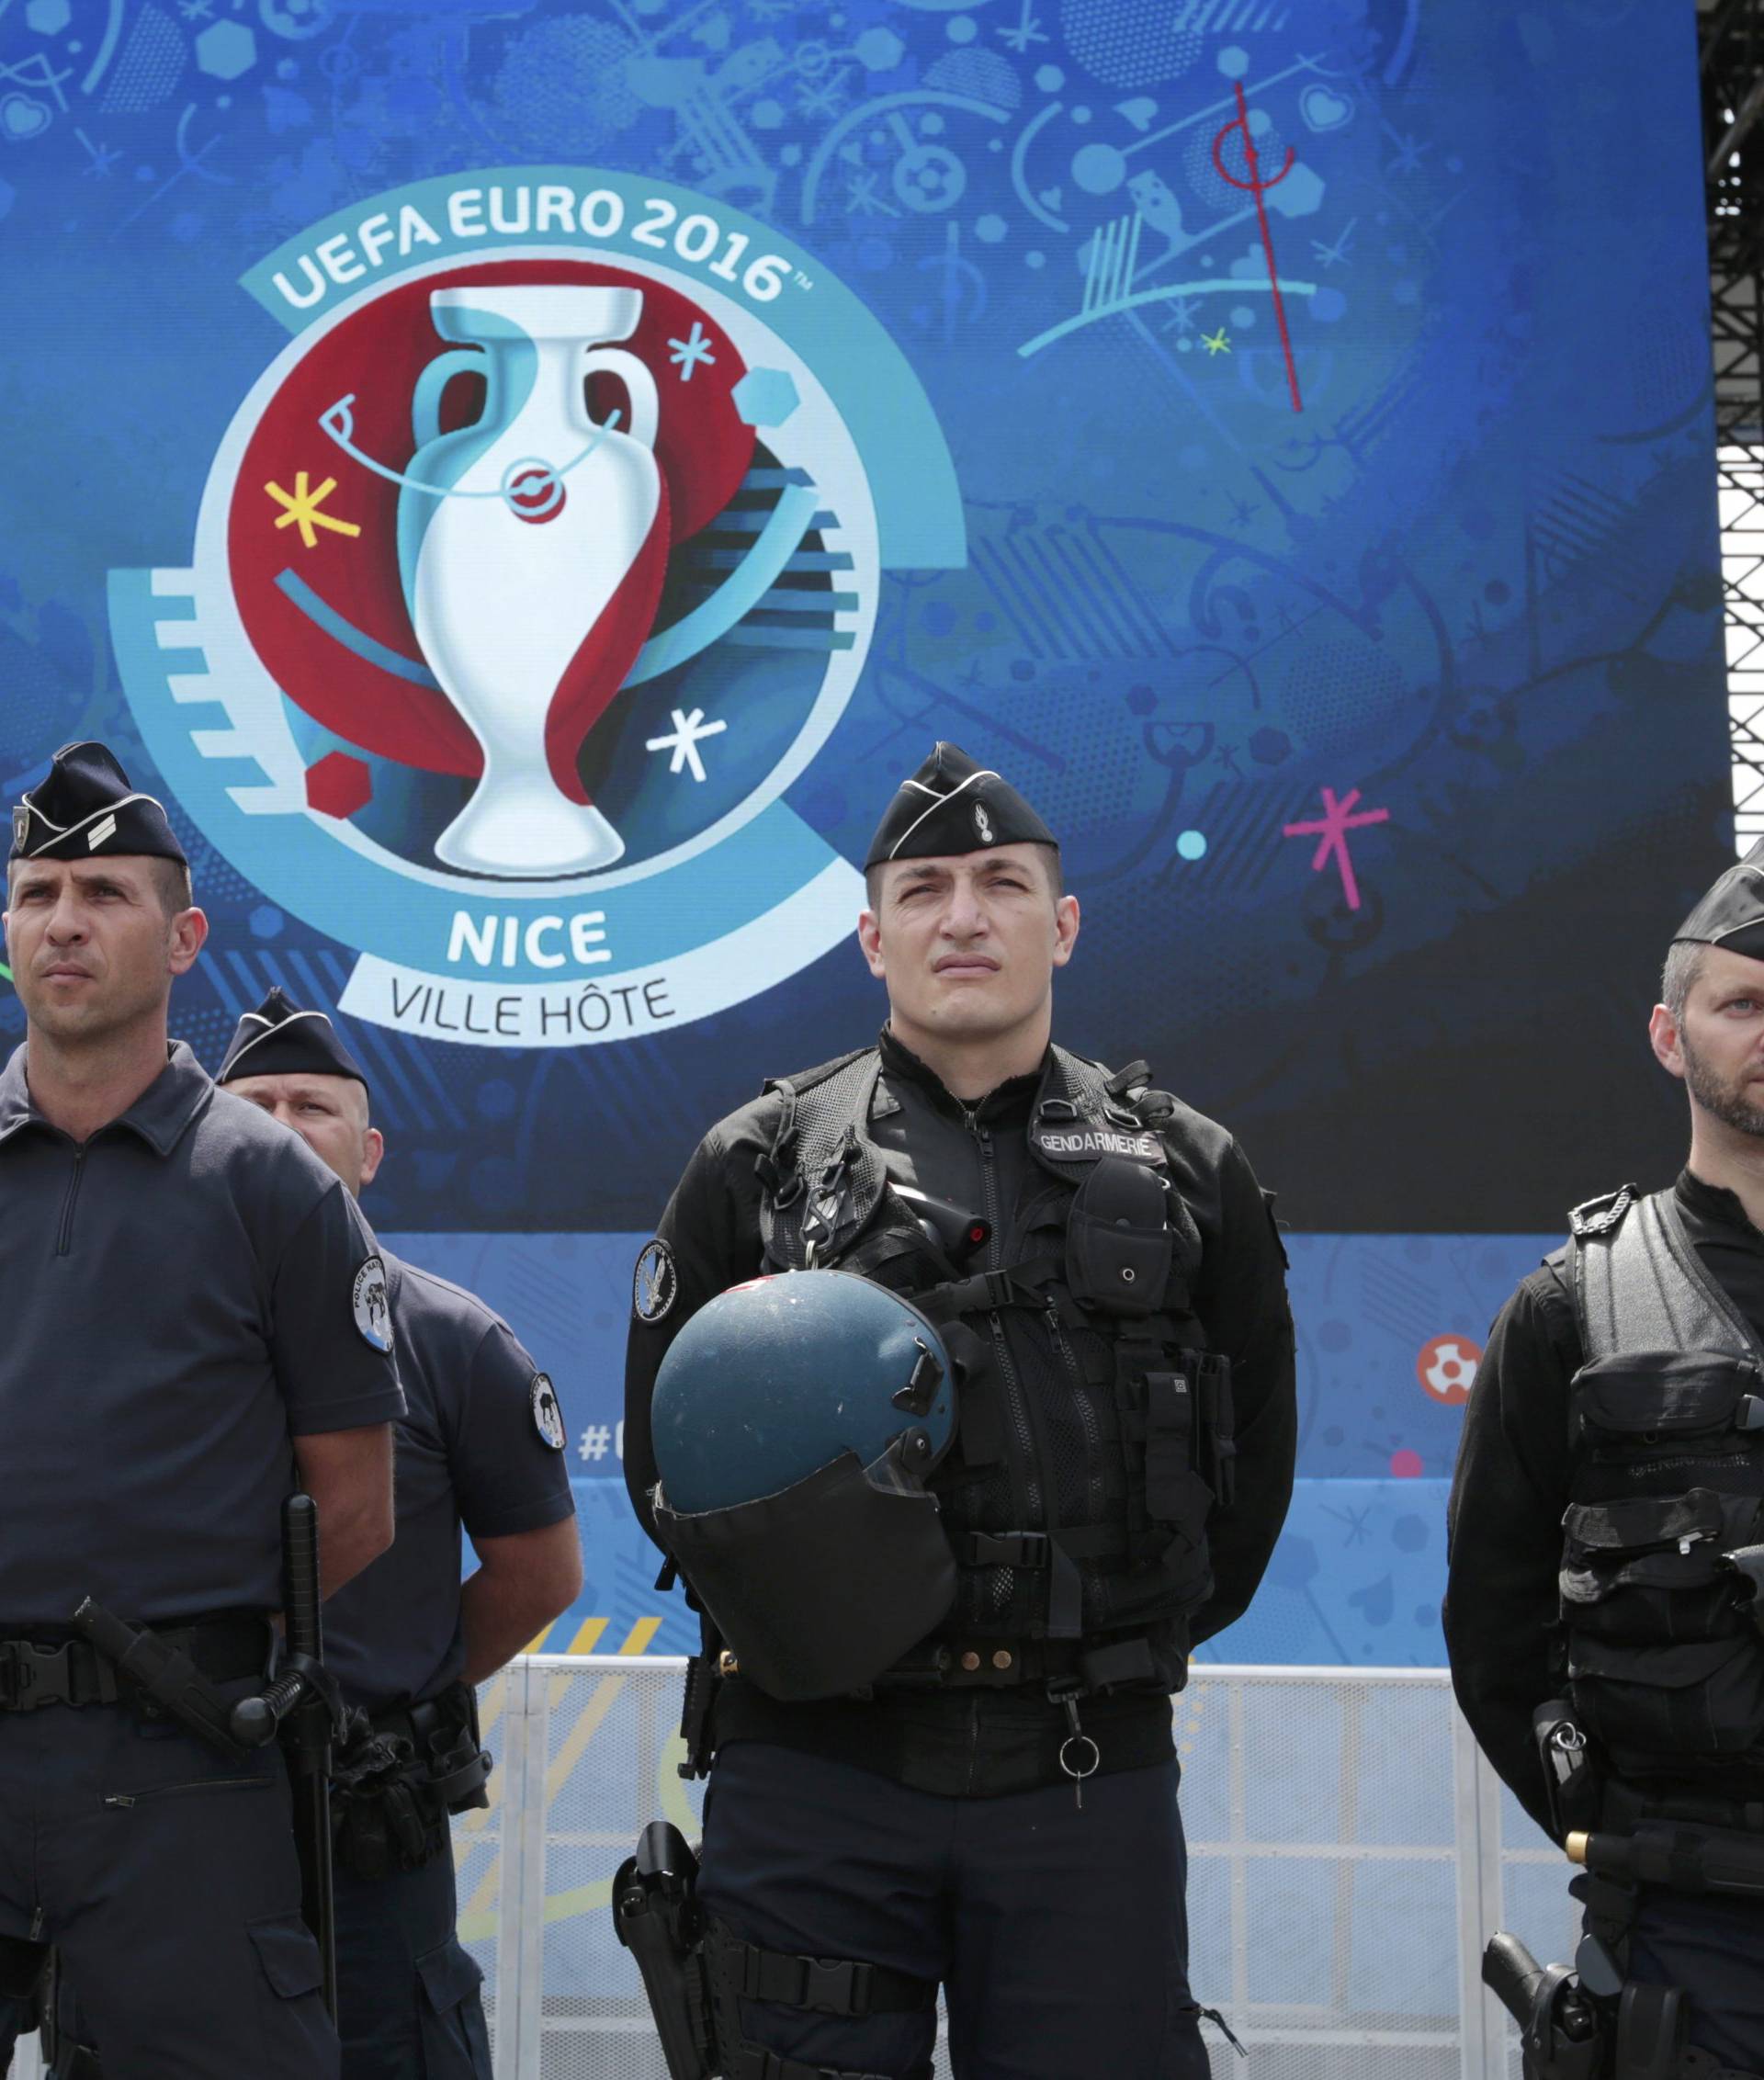 French police and gendarmes are seen during a visit at a fanzone ahead of the UEFA 2016 European Championship in Nice